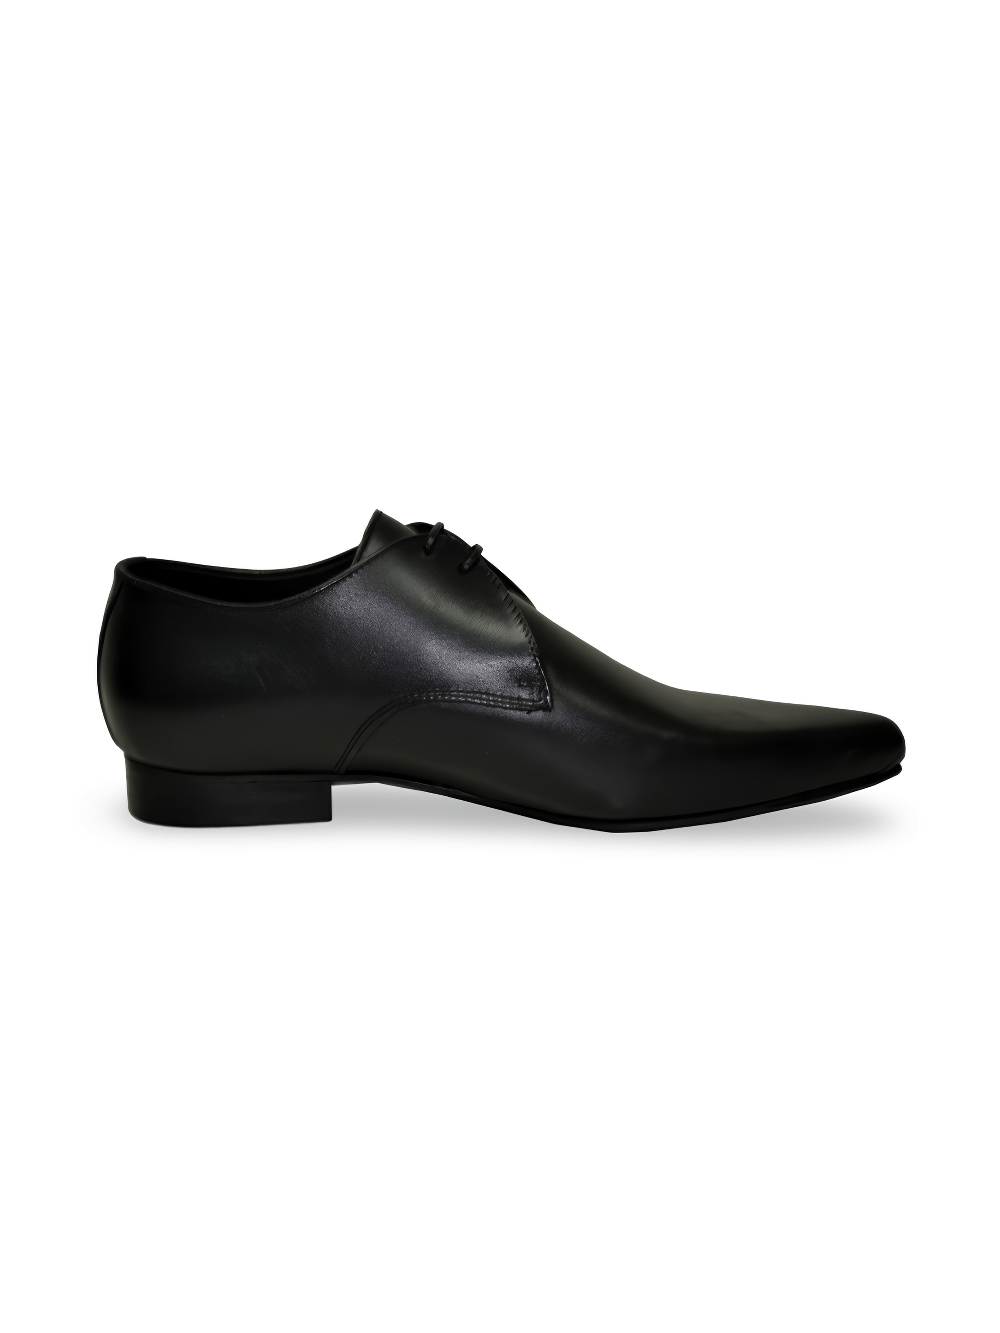 Men's Pointy Toe Black Oxford Shoes in Grained Leather